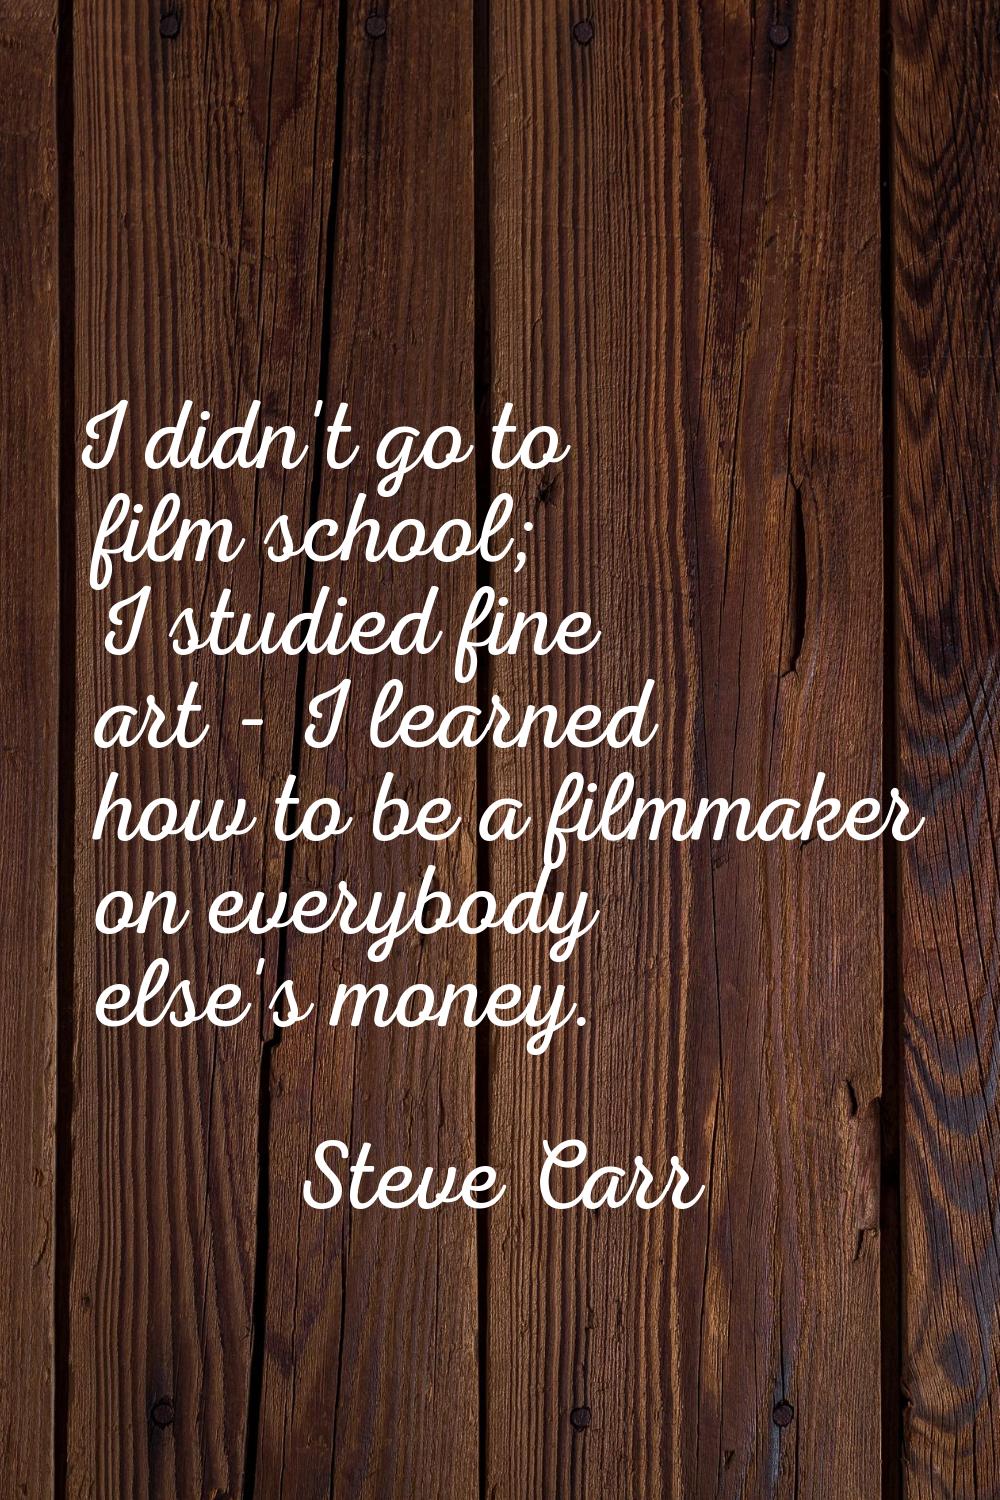 I didn't go to film school; I studied fine art - I learned how to be a filmmaker on everybody else'